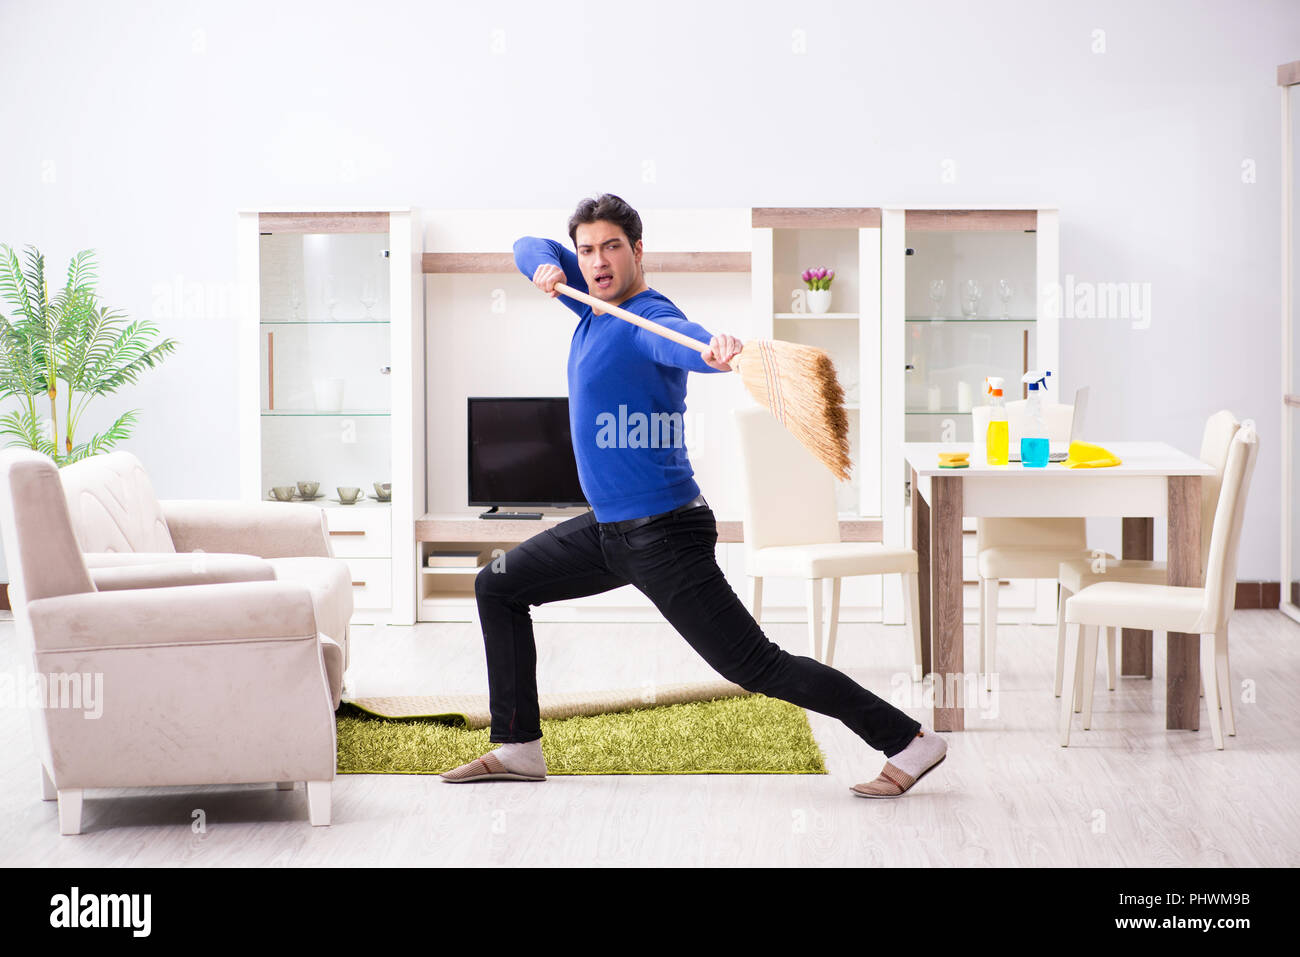 Young man cleaning floor with broom Stock Photo